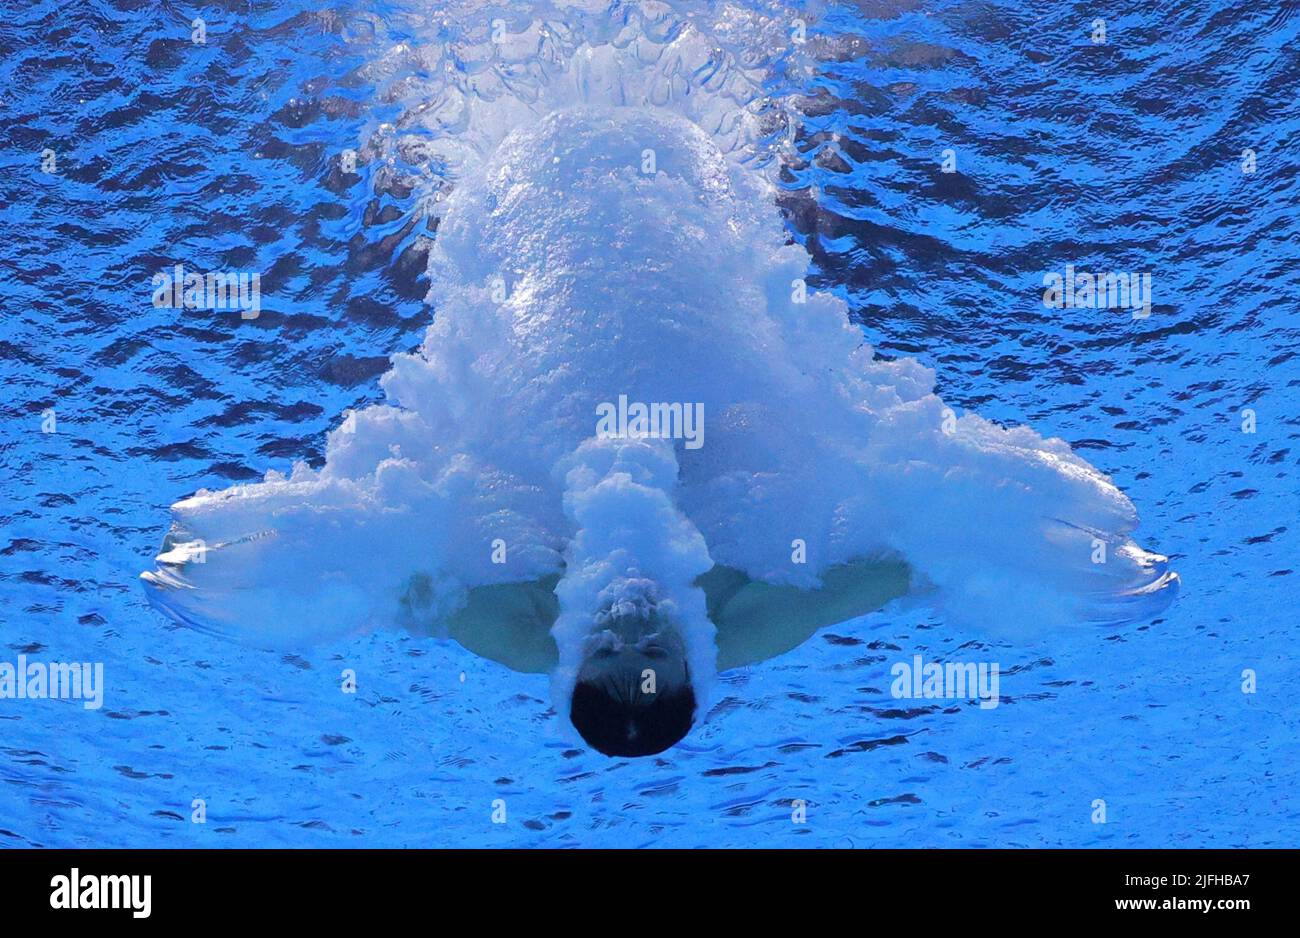 Diving - FINA World Championships - Duna Arena, Budapest, Hungary - July 3, 2022 China's Hao Yang in action during the men's 10m platform final REUTERS/Antonio Bronic Stock Photo